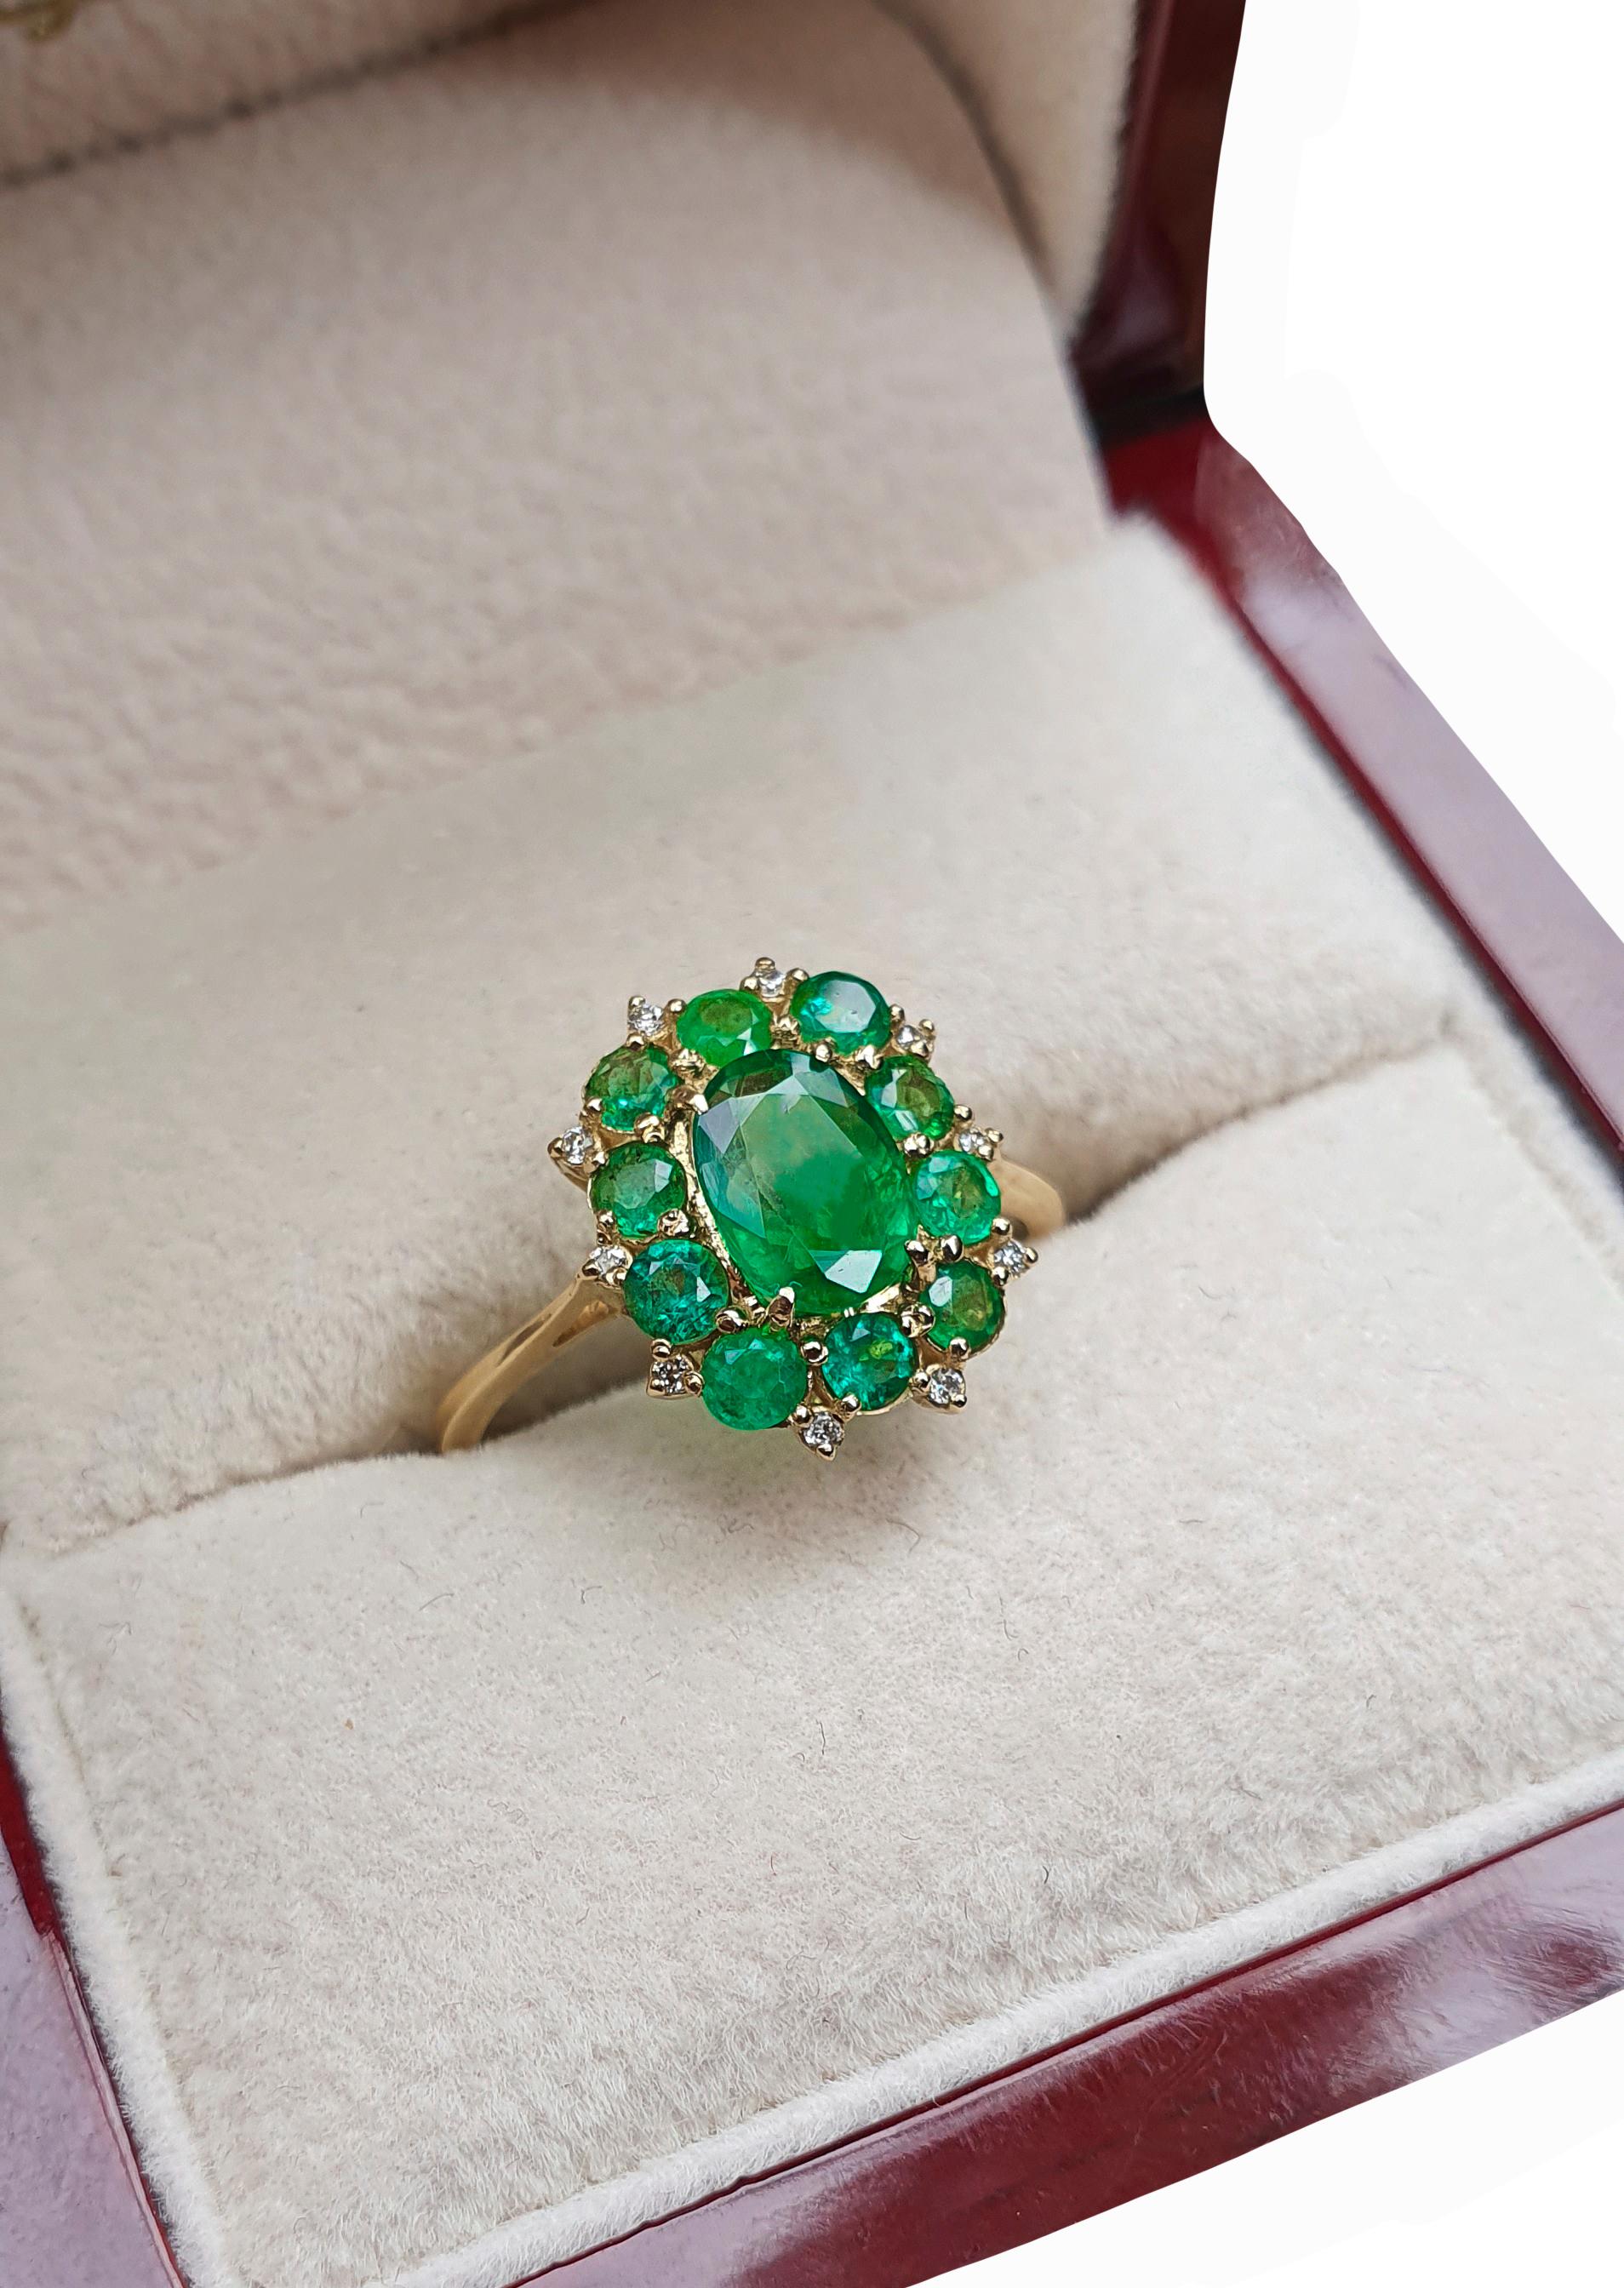 For Sale:  Emeralds and Diamonds 14k gold ring 3